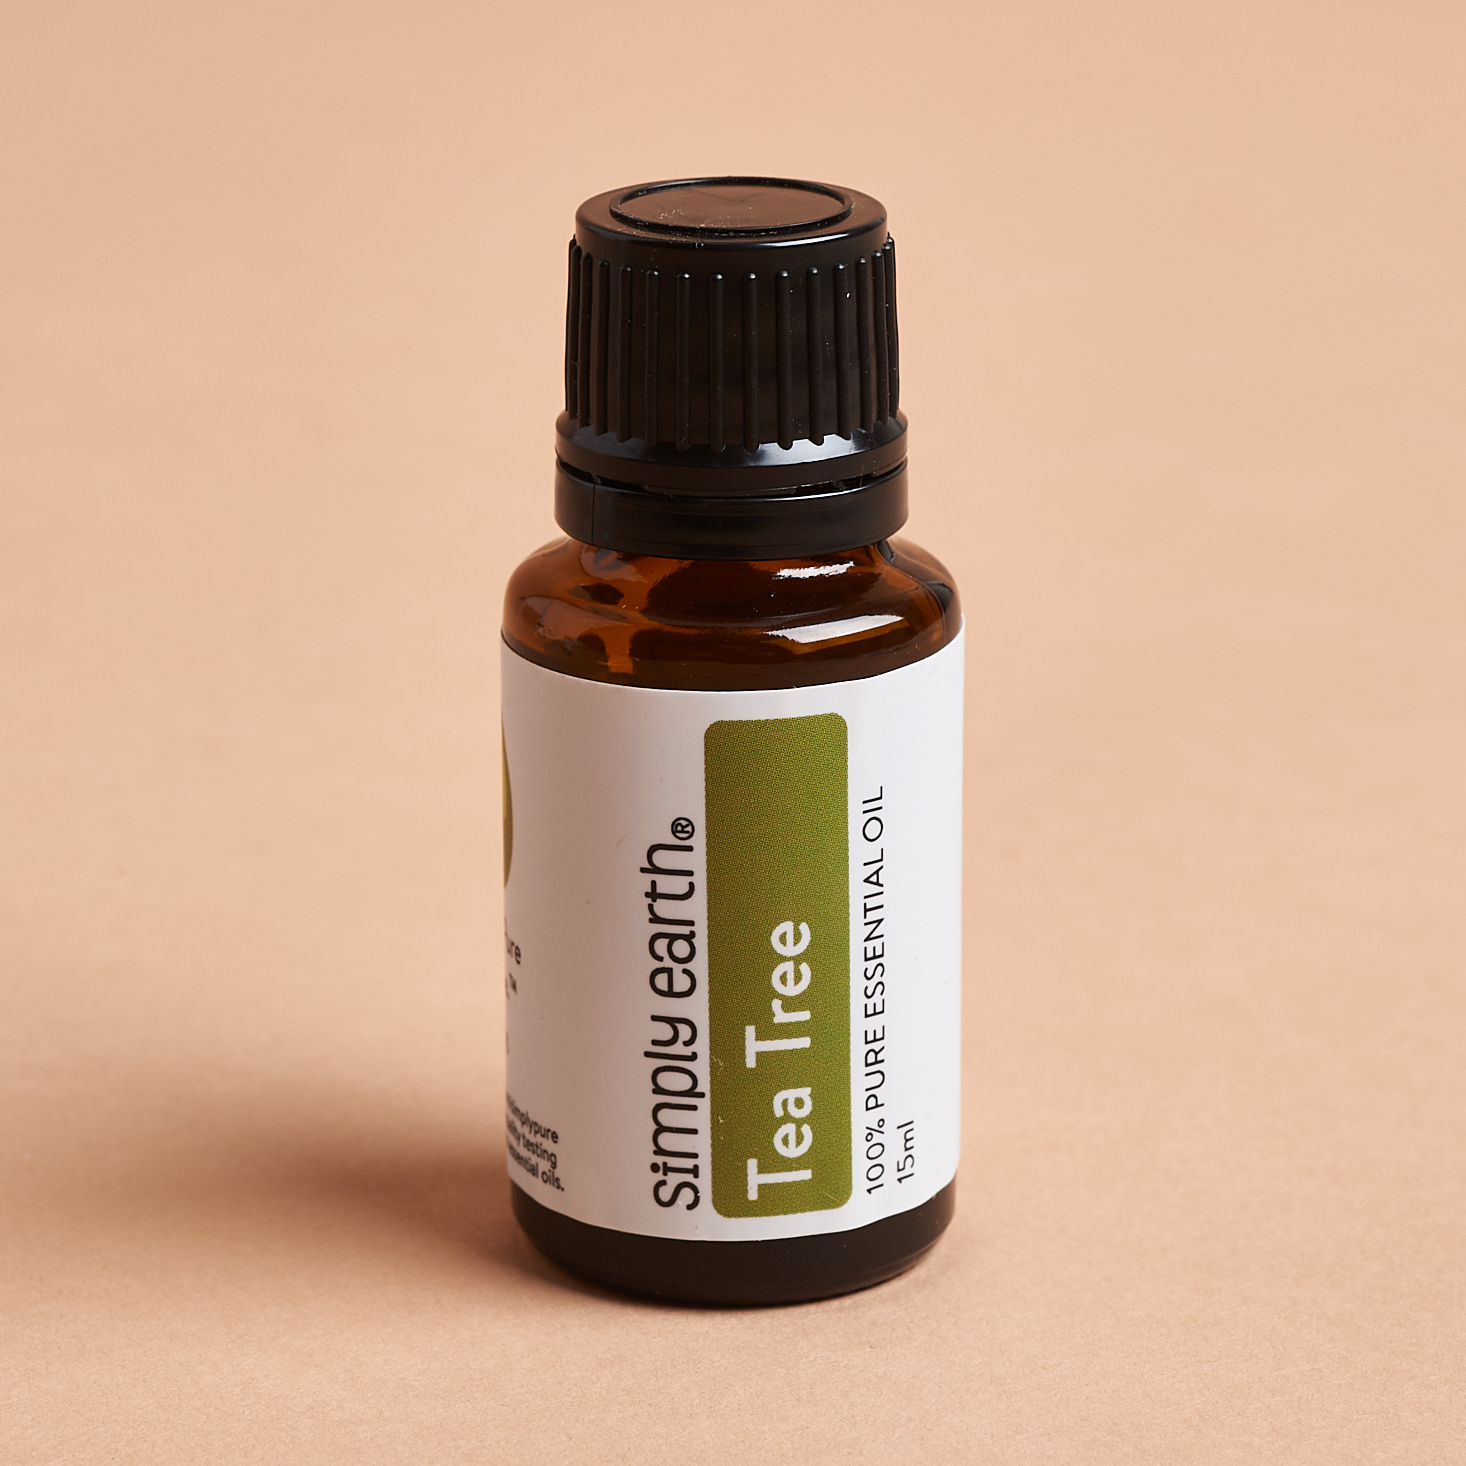 Simply Earth March 2021 tea tree essential oil